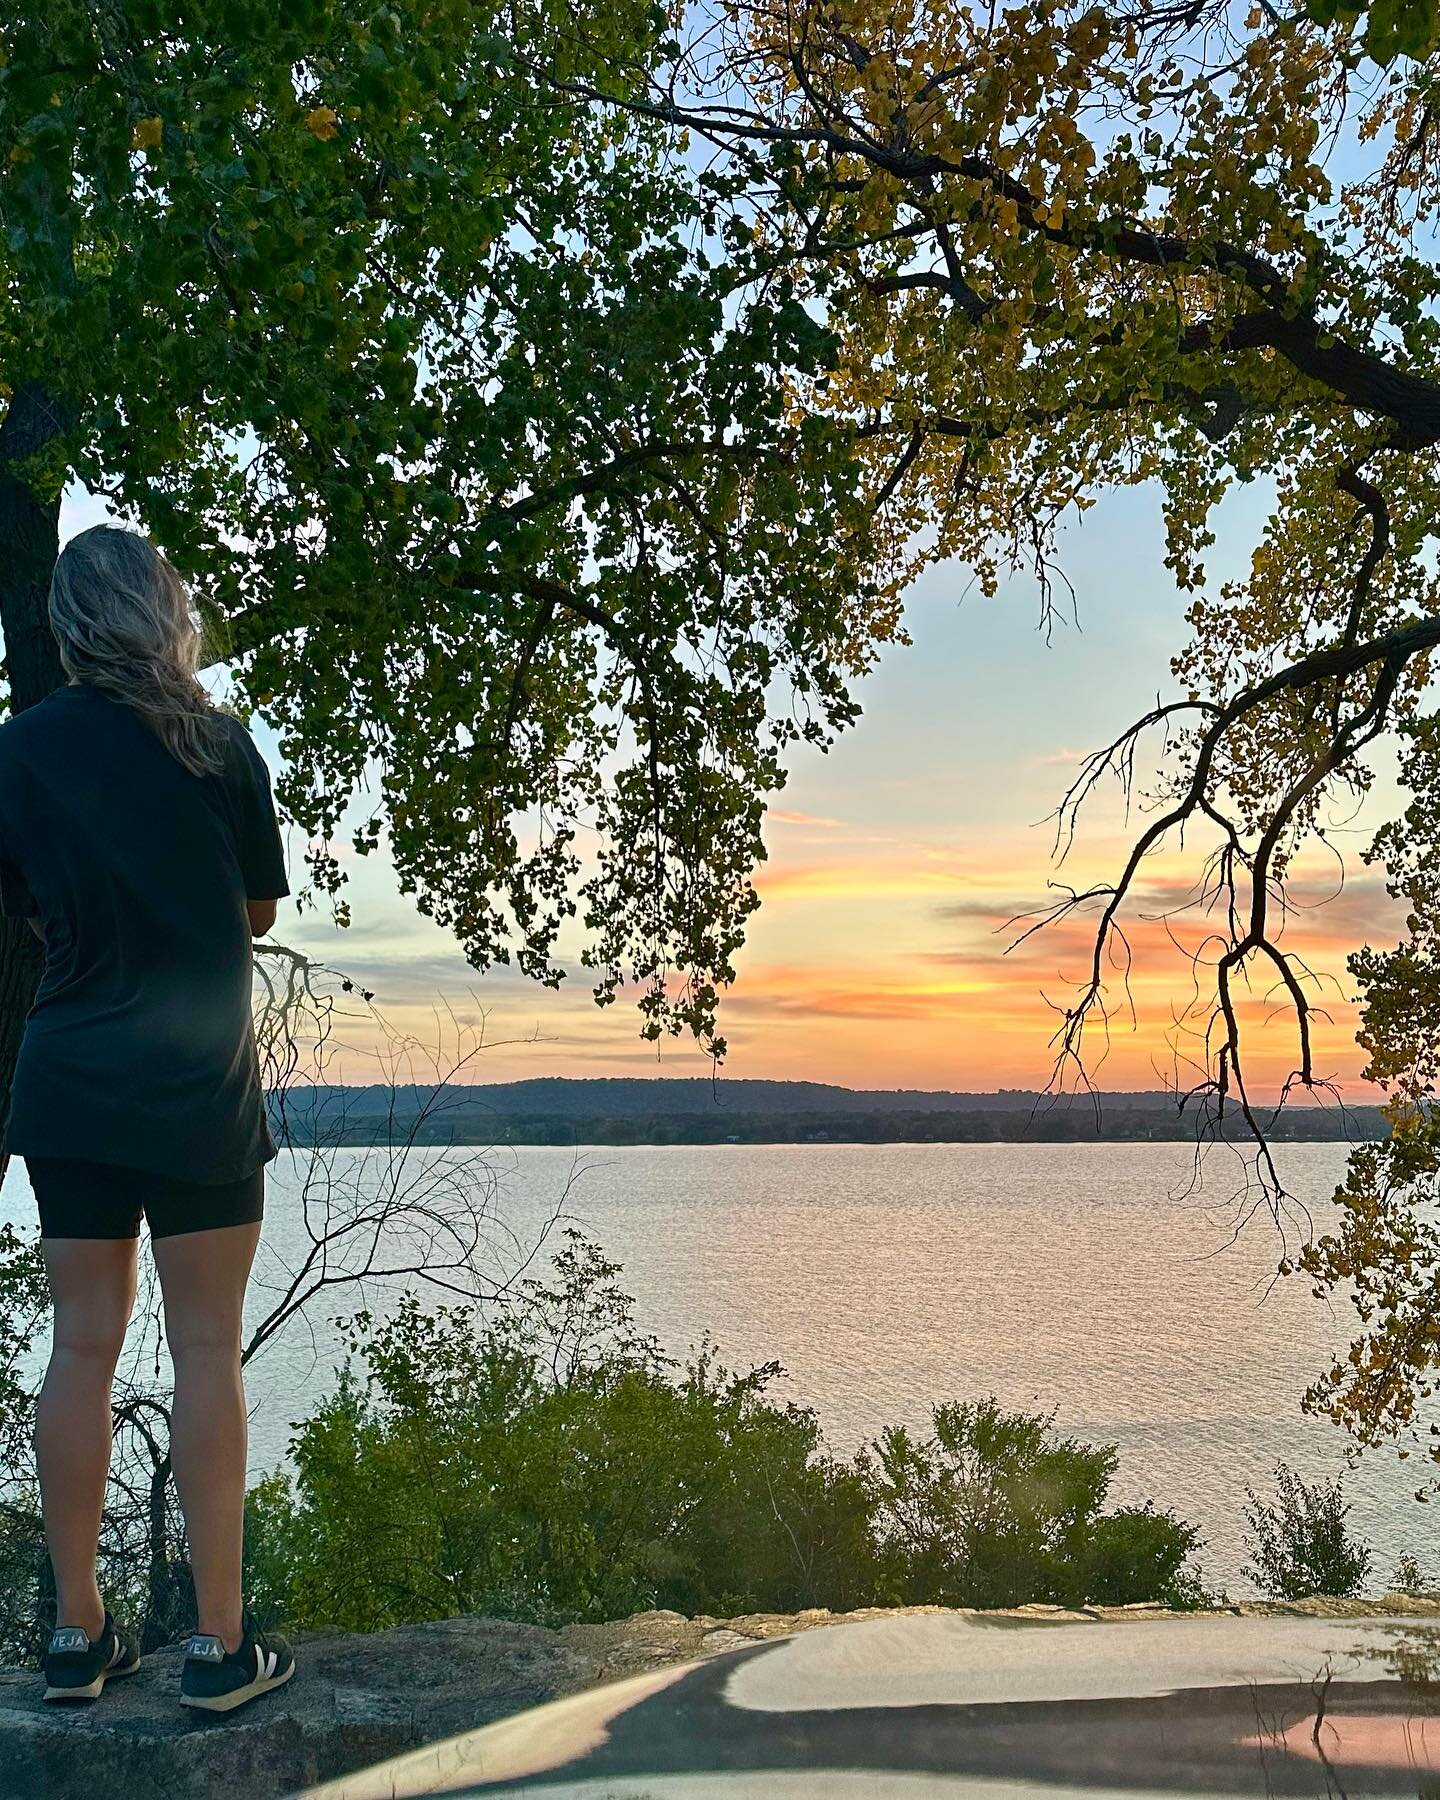 As we enter a new season I can&rsquo;t help but reflect on all the good from the season past. ❤️

Btw, has anyone watched the sun set over Lake Pepin?! SO GOOD. 🤩 I used to come to this v spot oh so often. I&rsquo;d sprawl out like starfish on my re